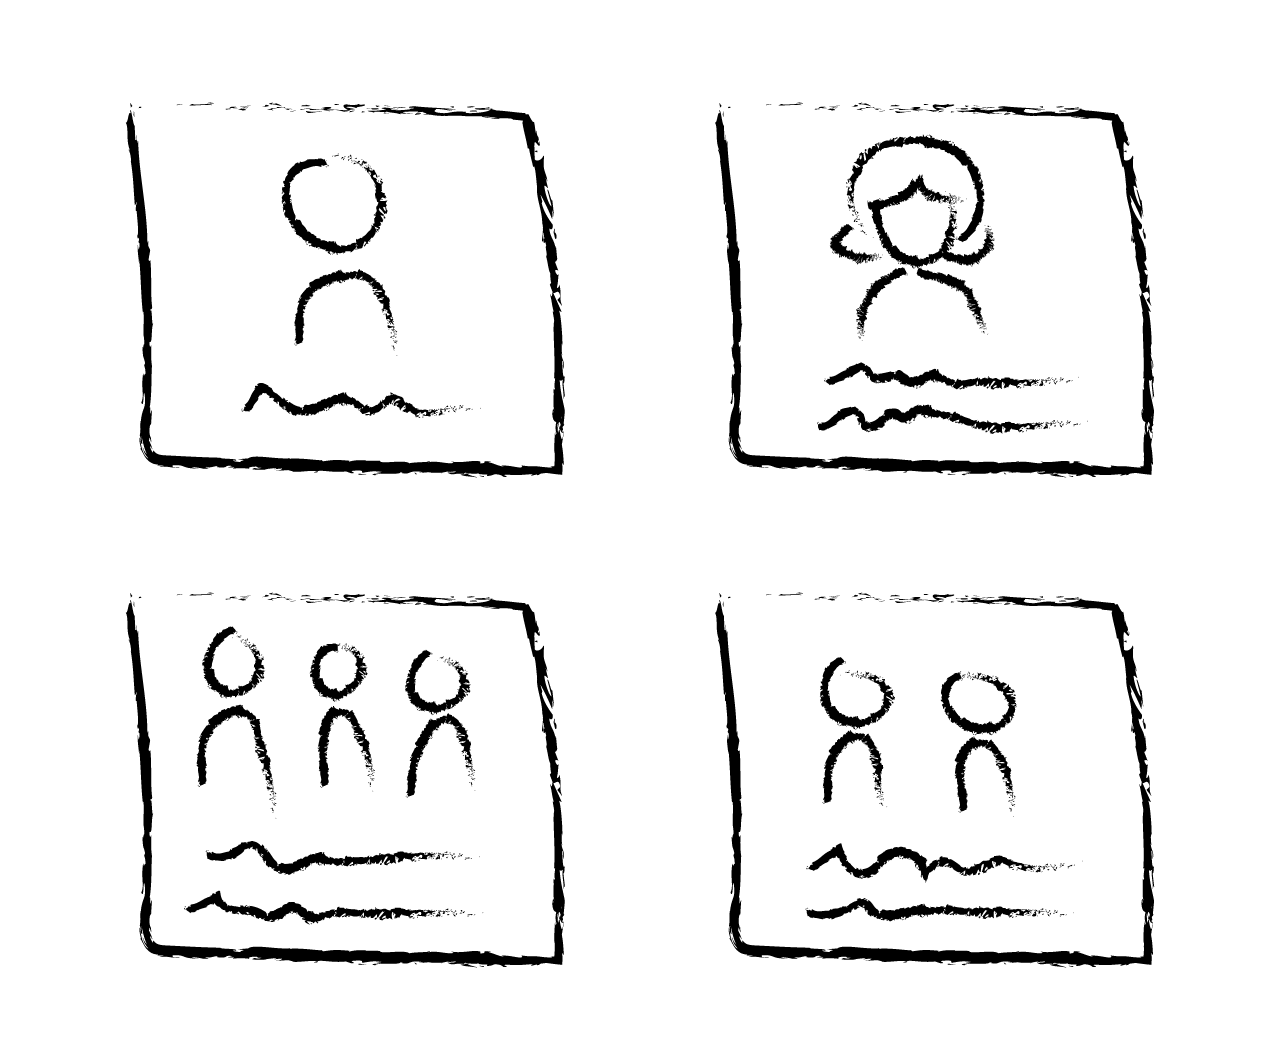 Sketch of stakeholder sticky notes